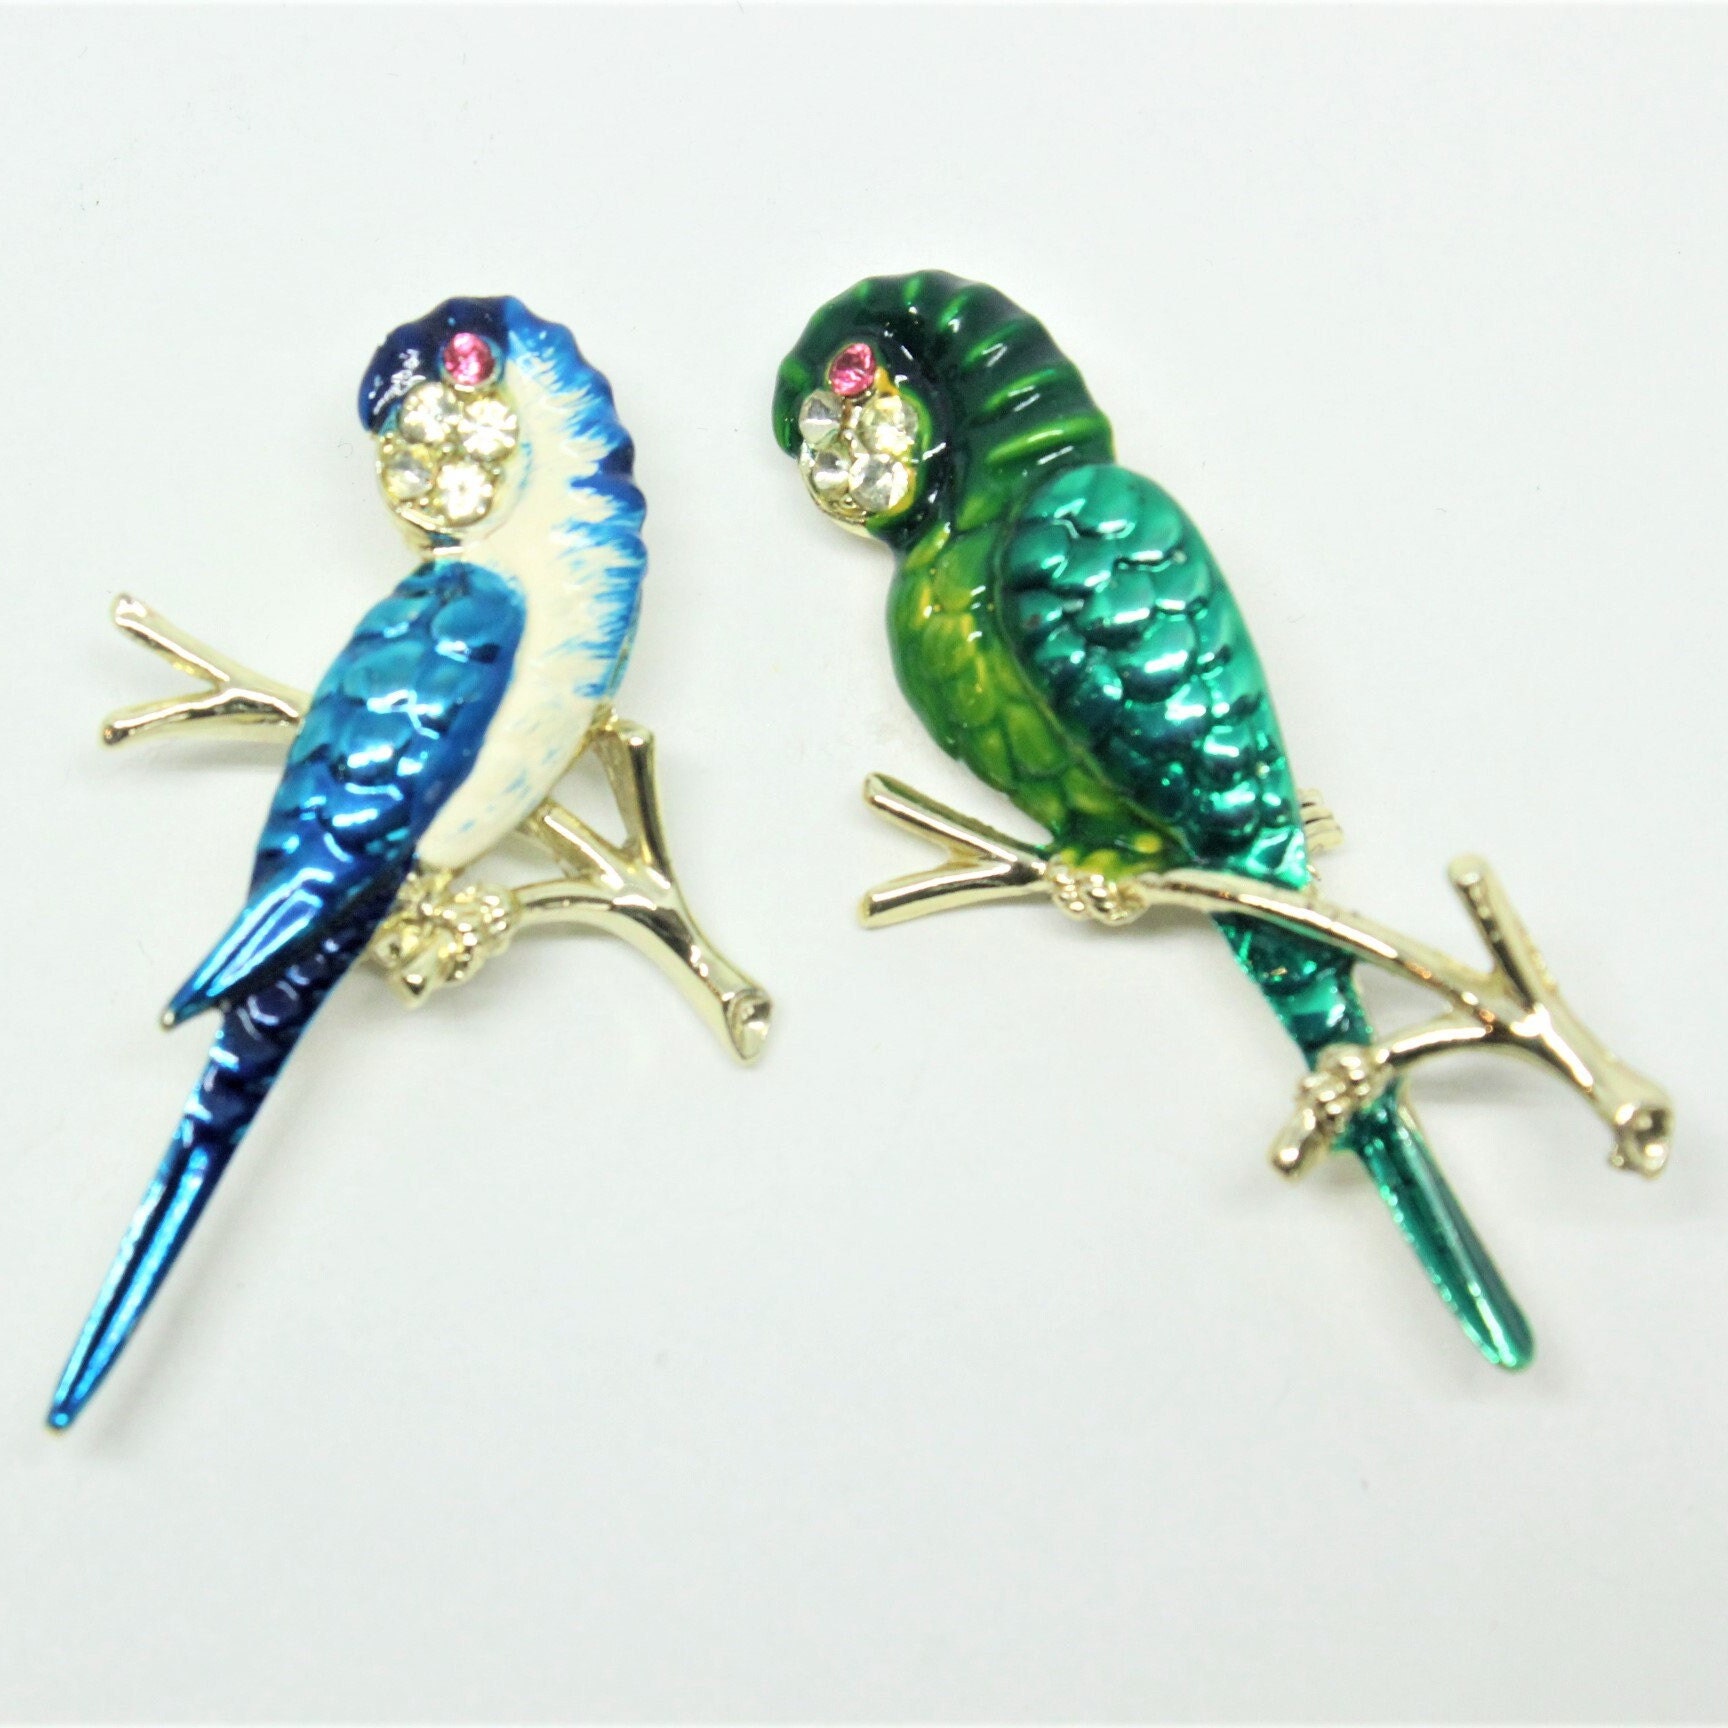 Diamond Parrots Perched on a Branch Gold Brooch Pin - Coach Luxury